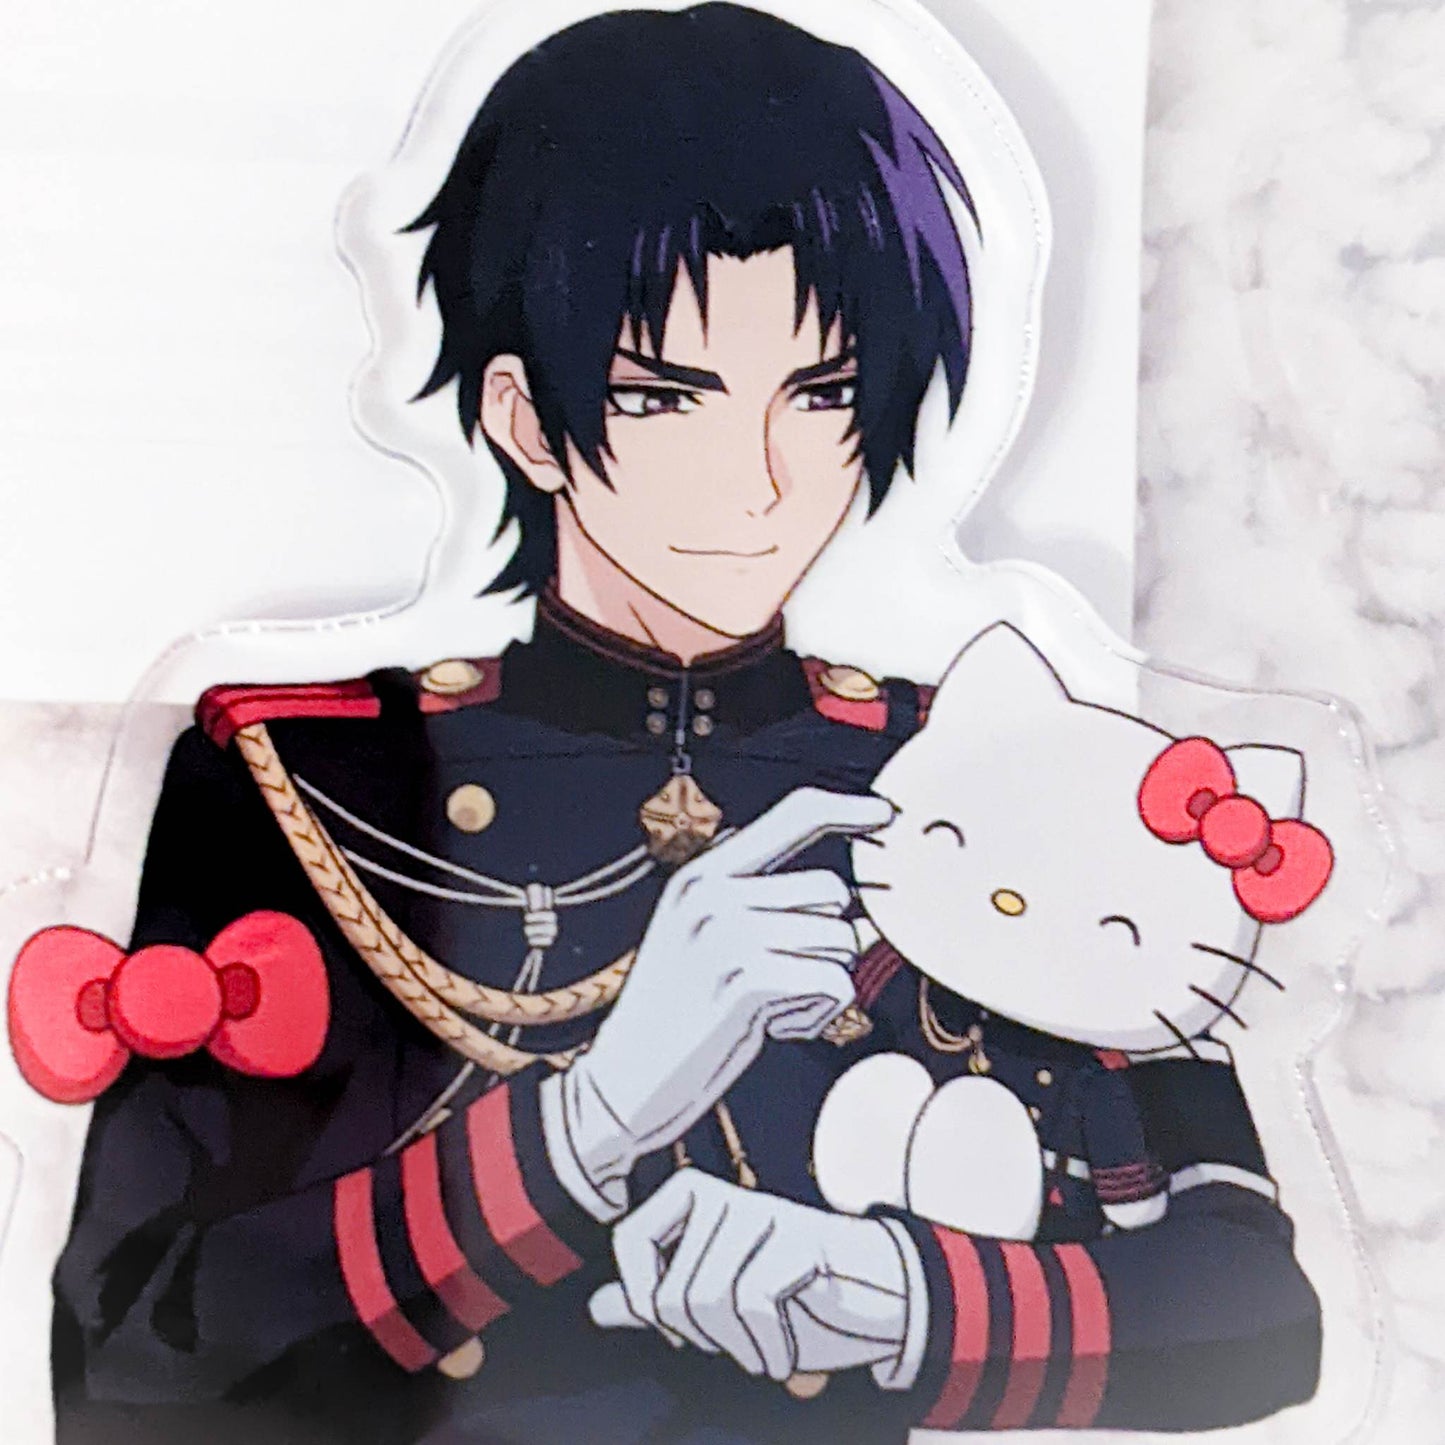 Hi! I hope this anime is not dead yet but I did a guren ichinose cosplay  from seraph of the end : r/anime